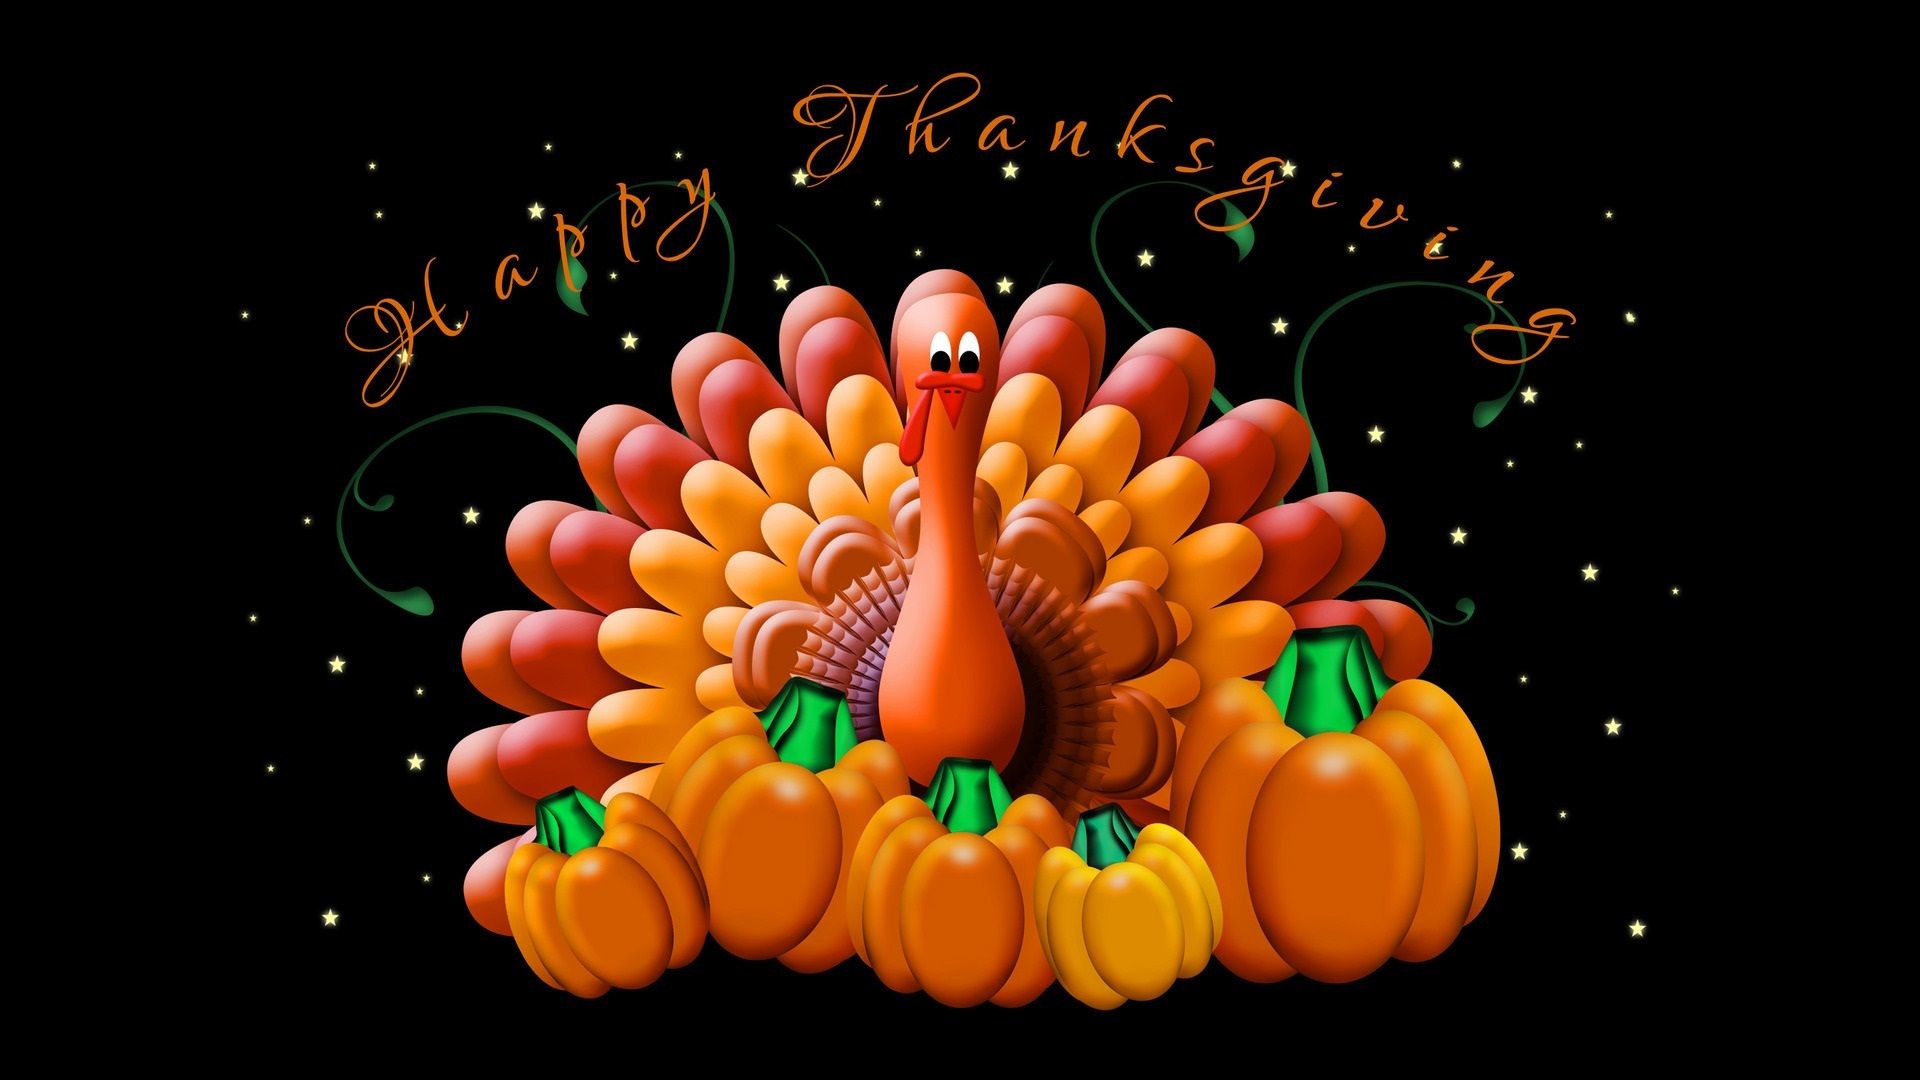 Happy Thanksgiving GIFs  35 Animated Greeting Cards  USAGIFcom